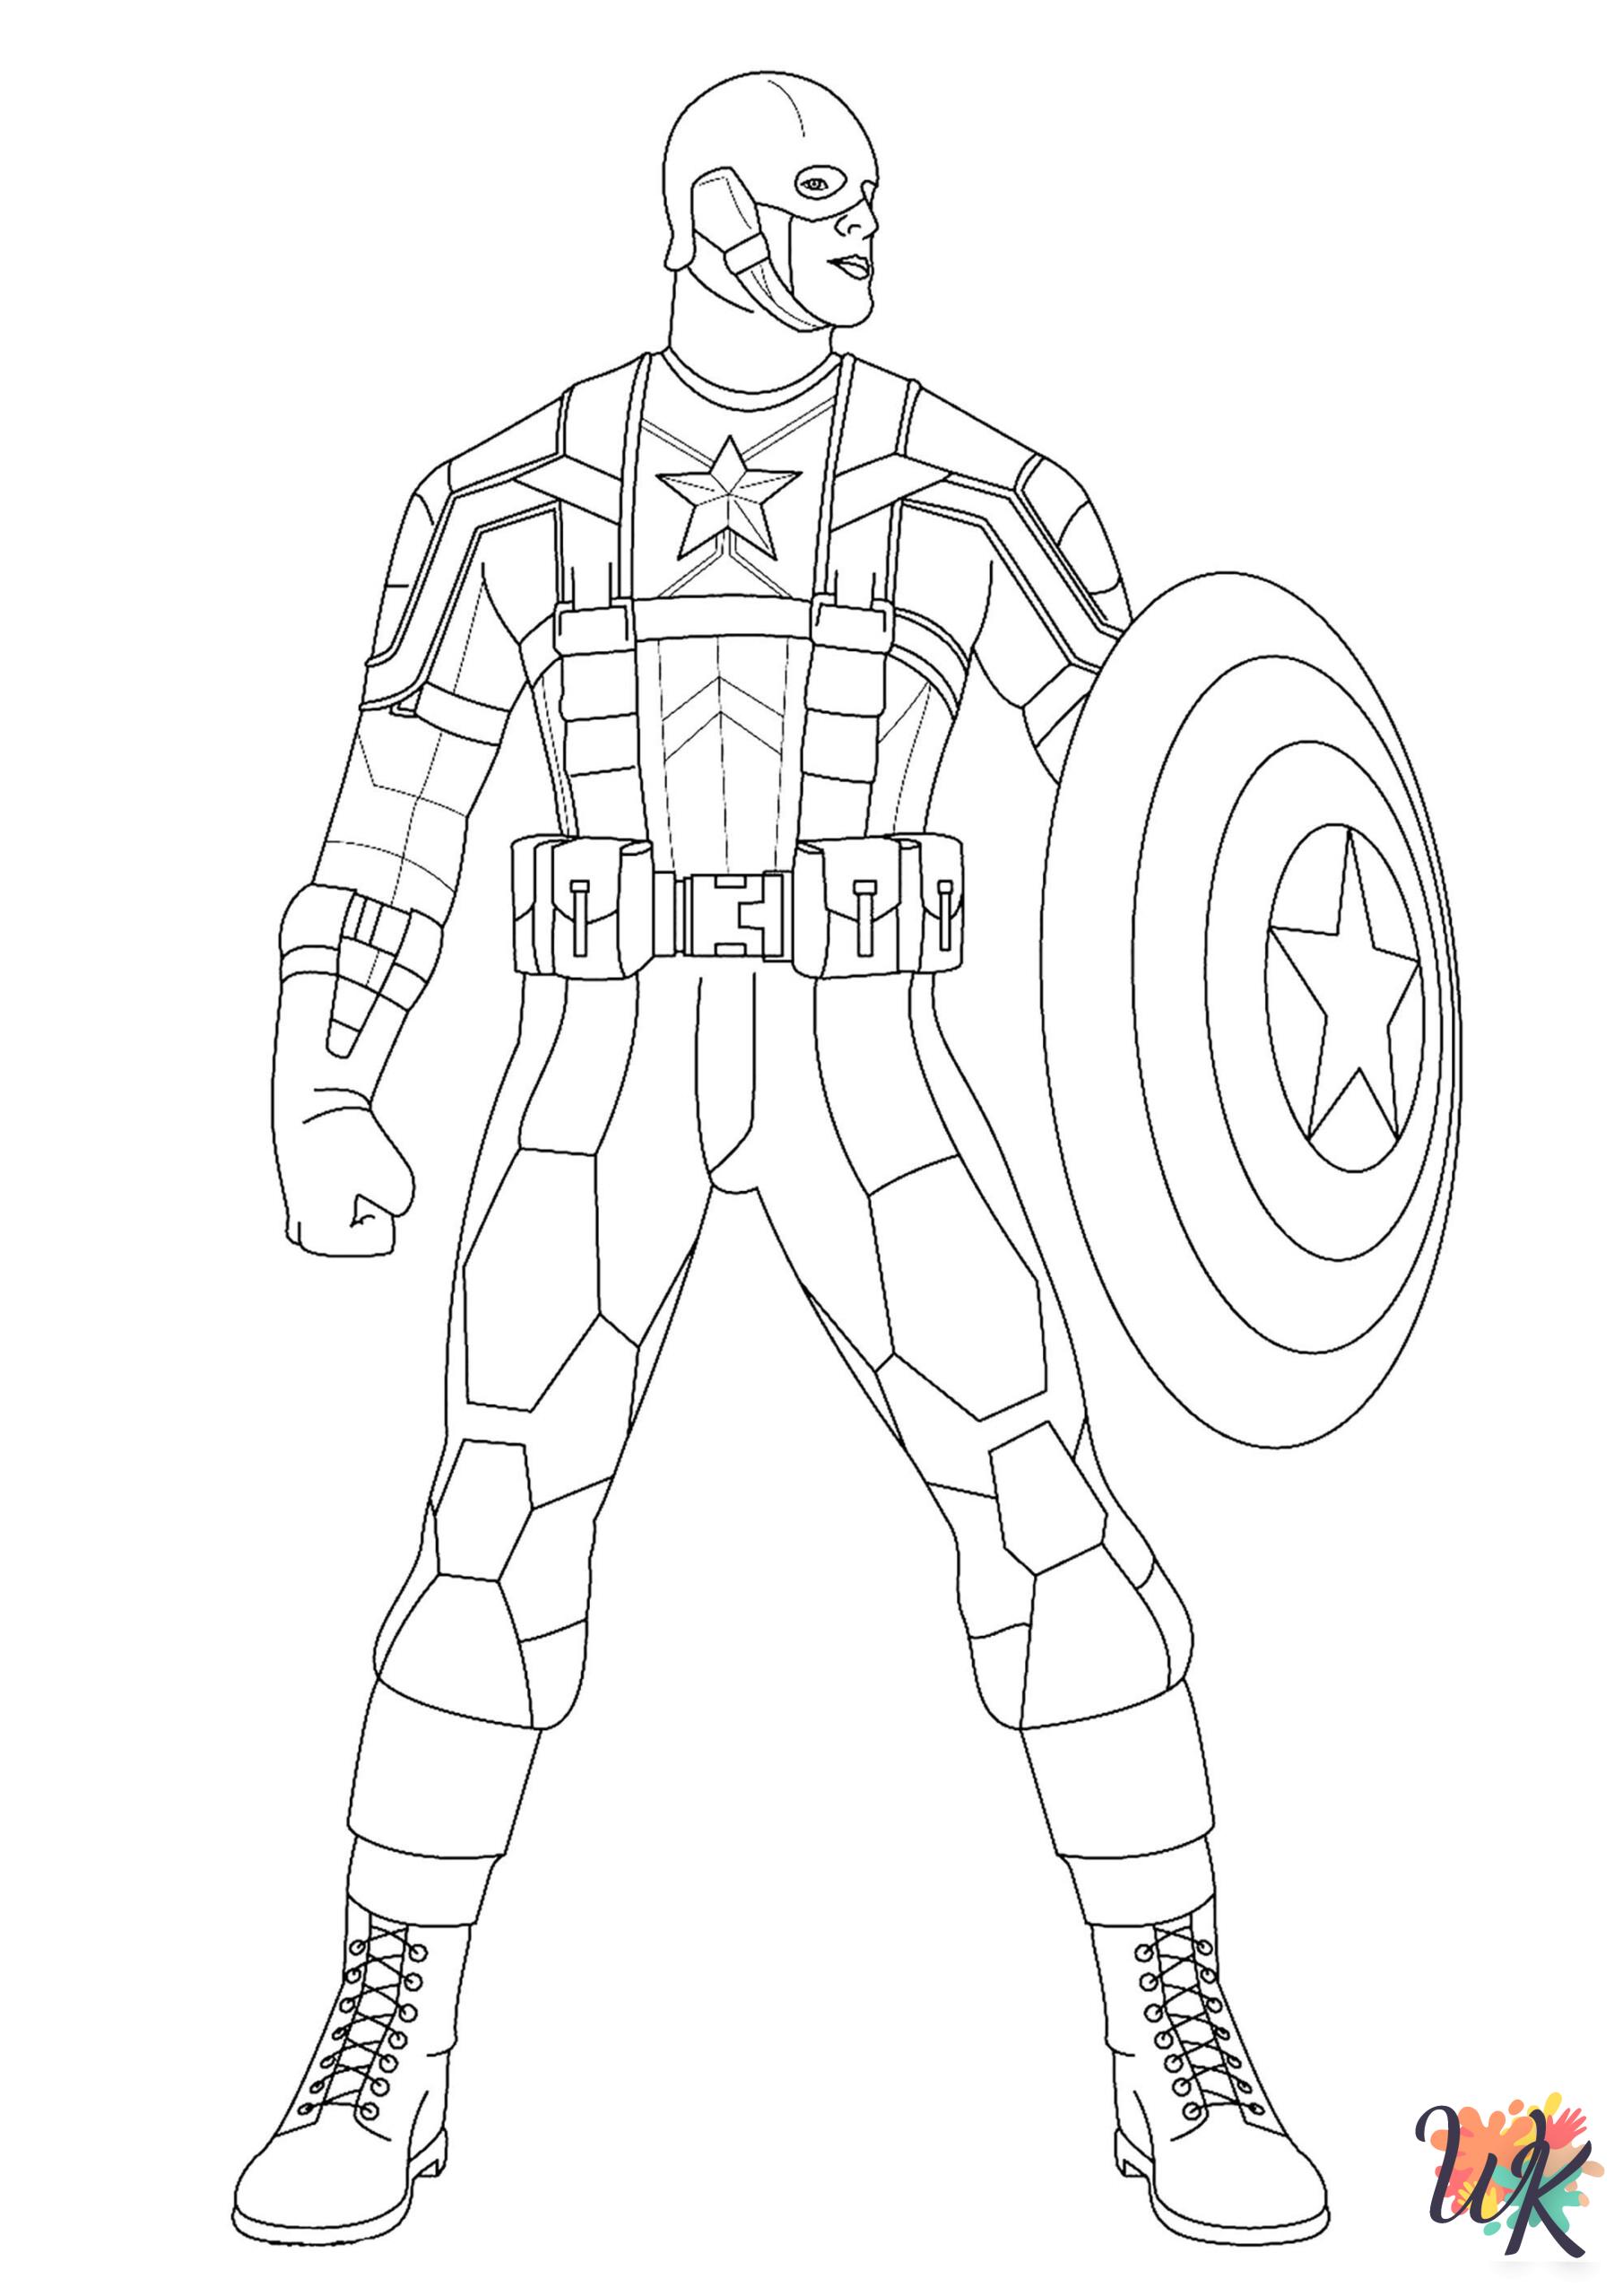 Superhero ornaments coloring pages